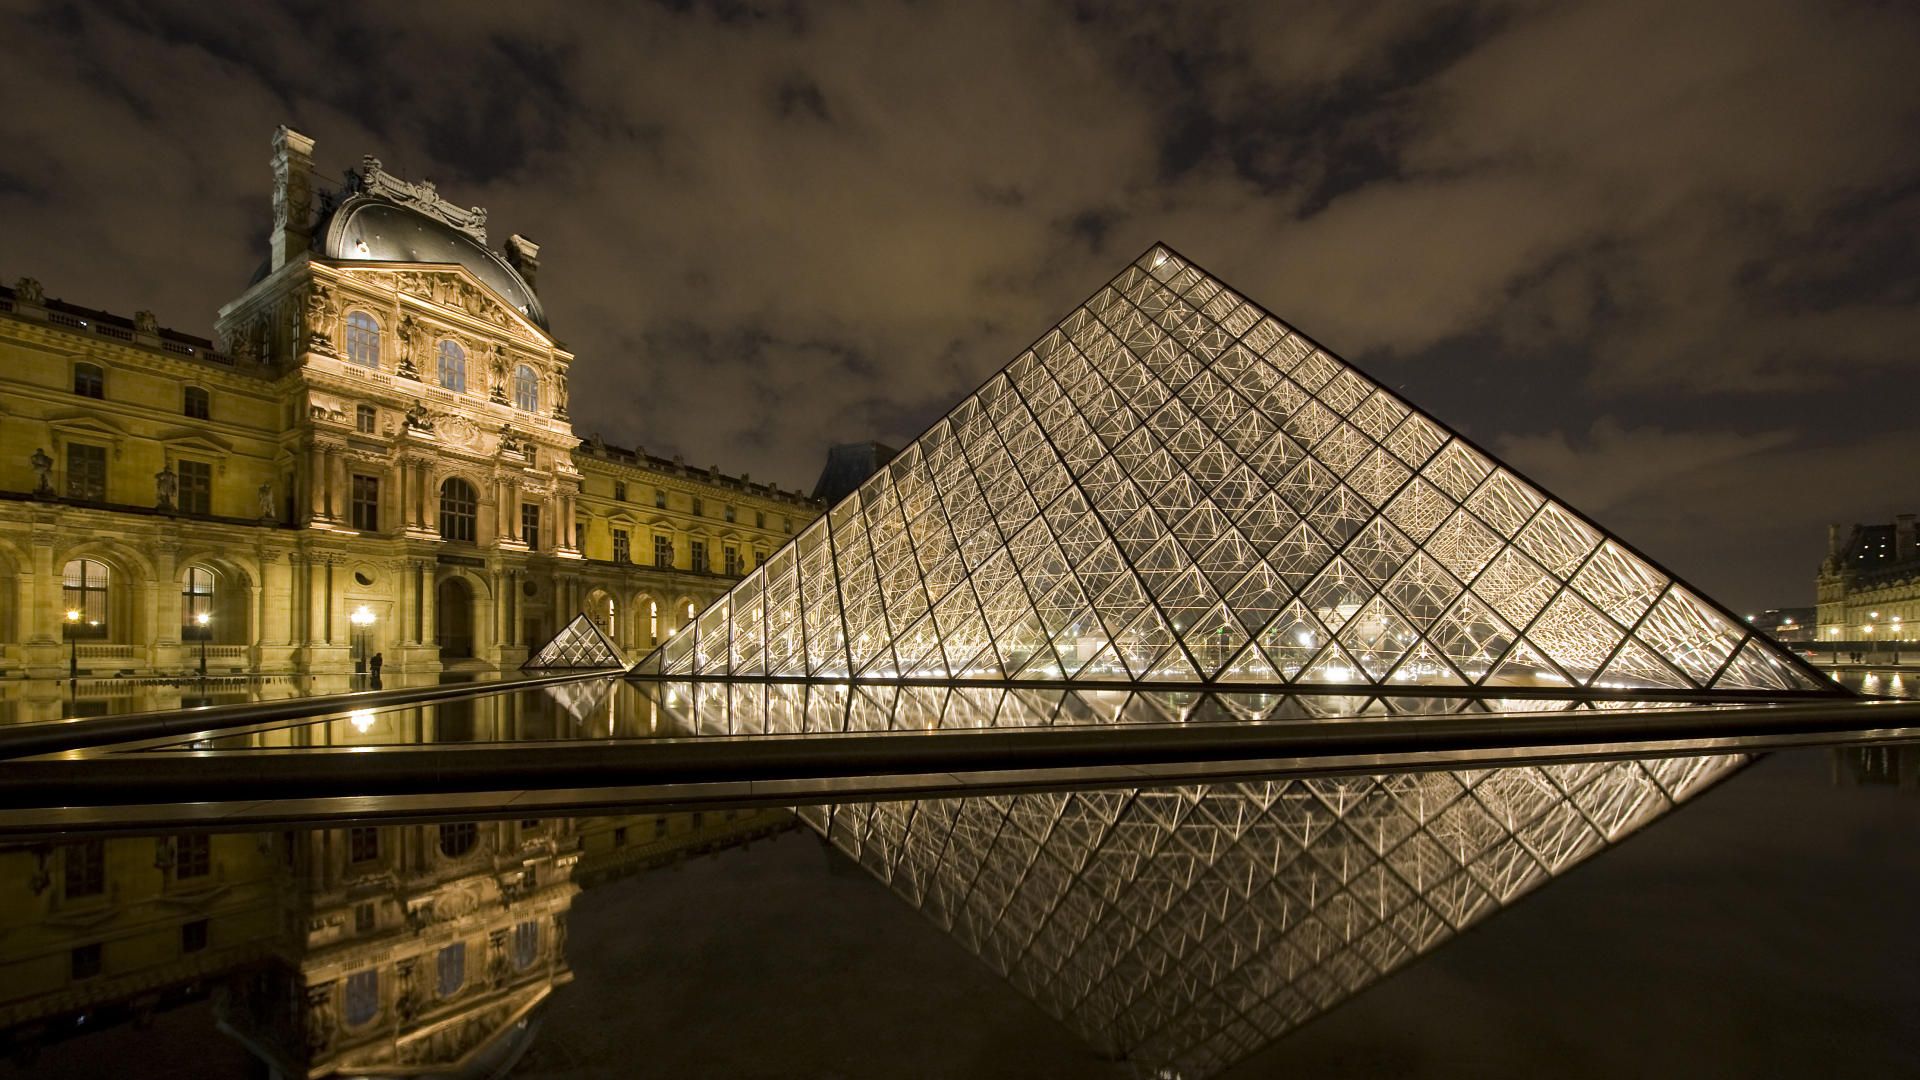 Buildings City Louvre Pyramid At Night Paris France Picture